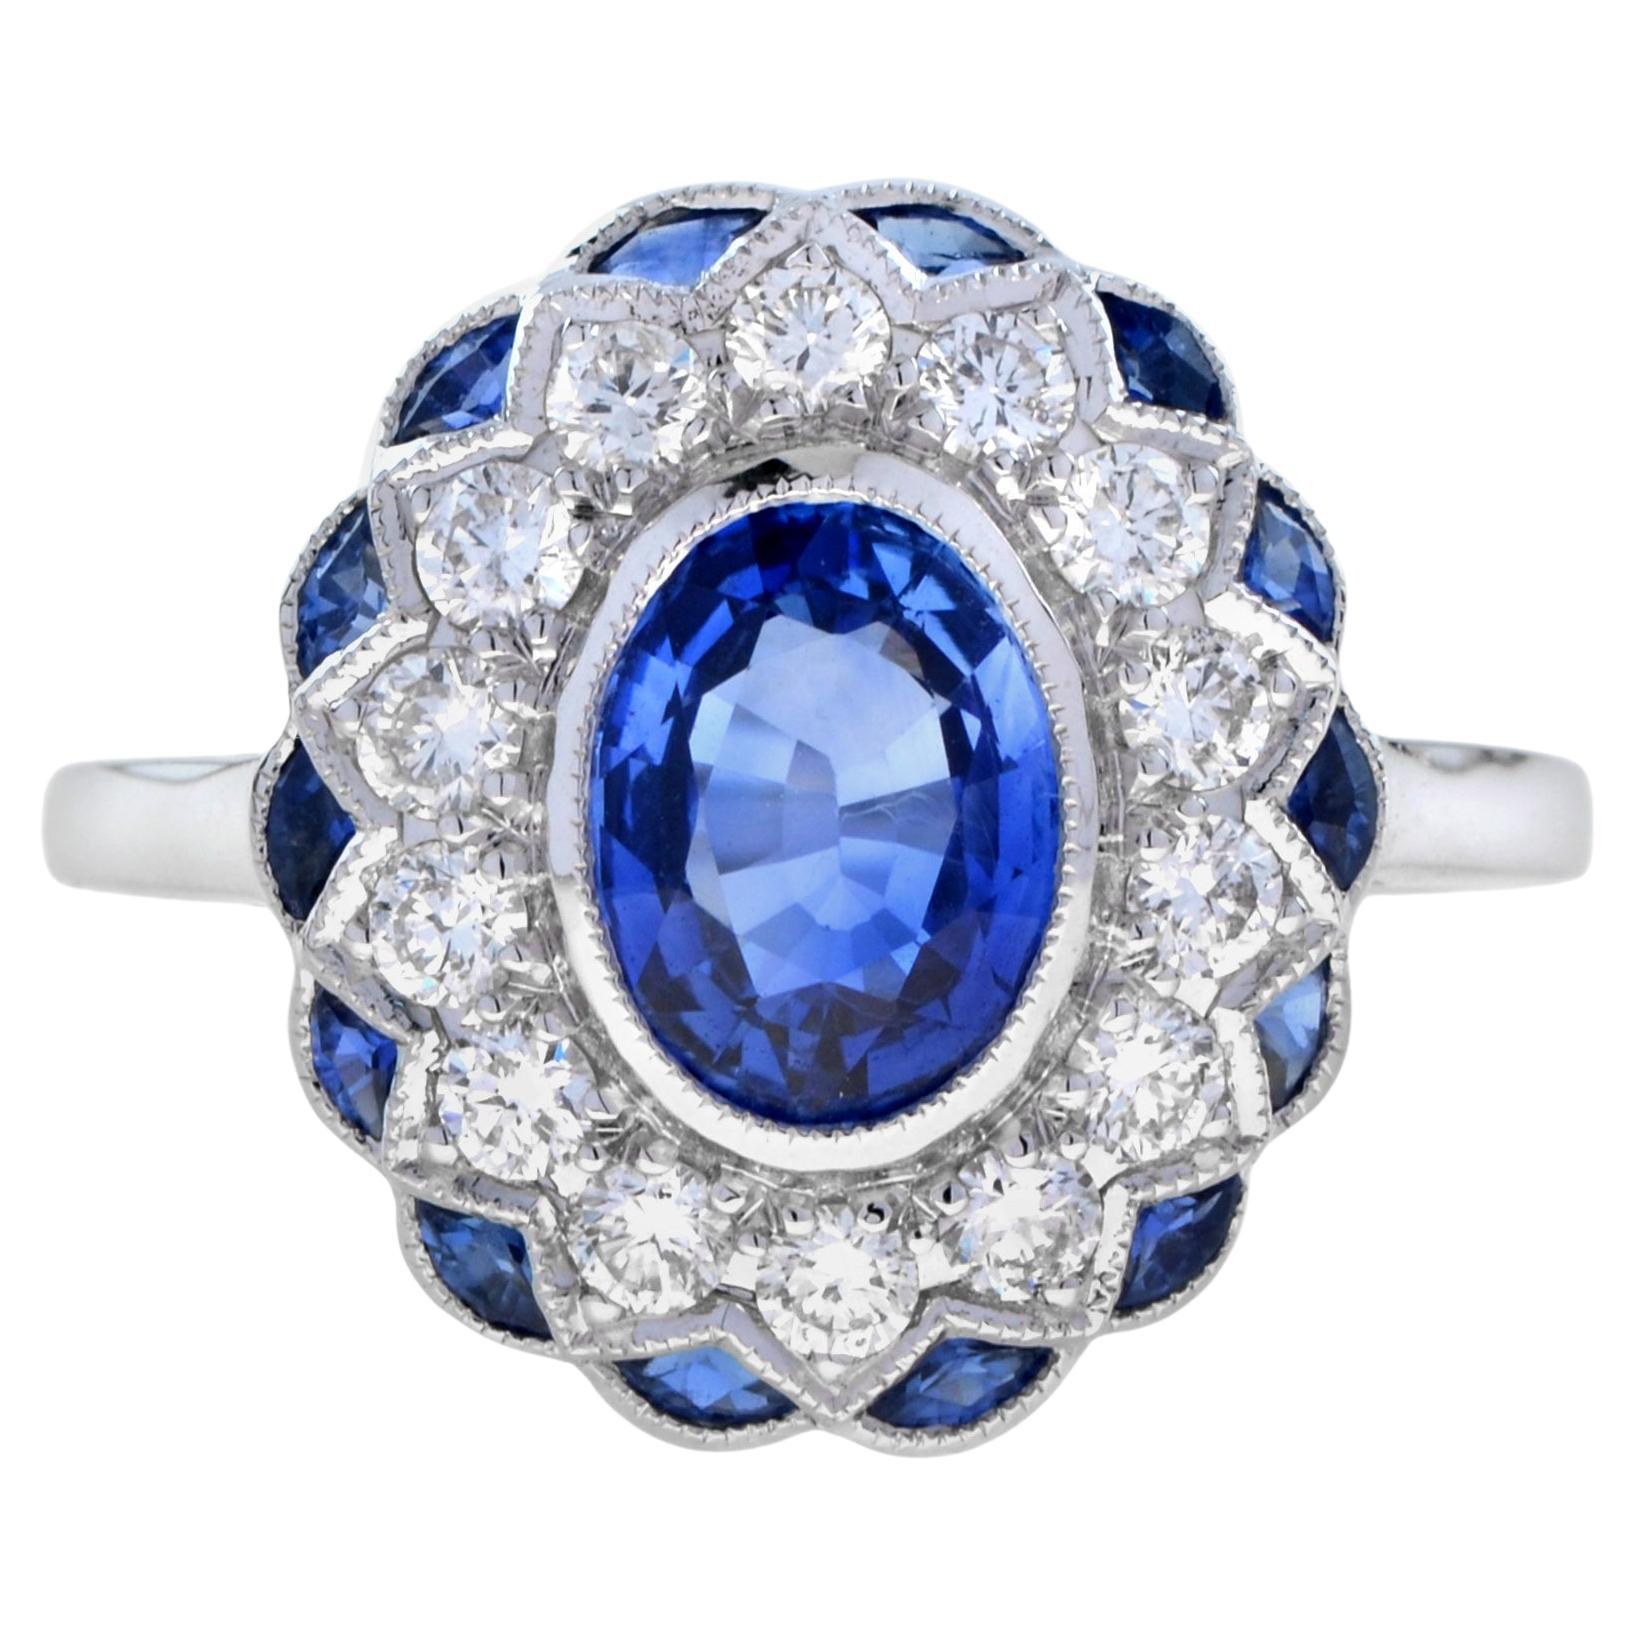 Oval Cut Ceylon Sapphire and Diamond Art Deco Style Halo Ring in 18K White Gold